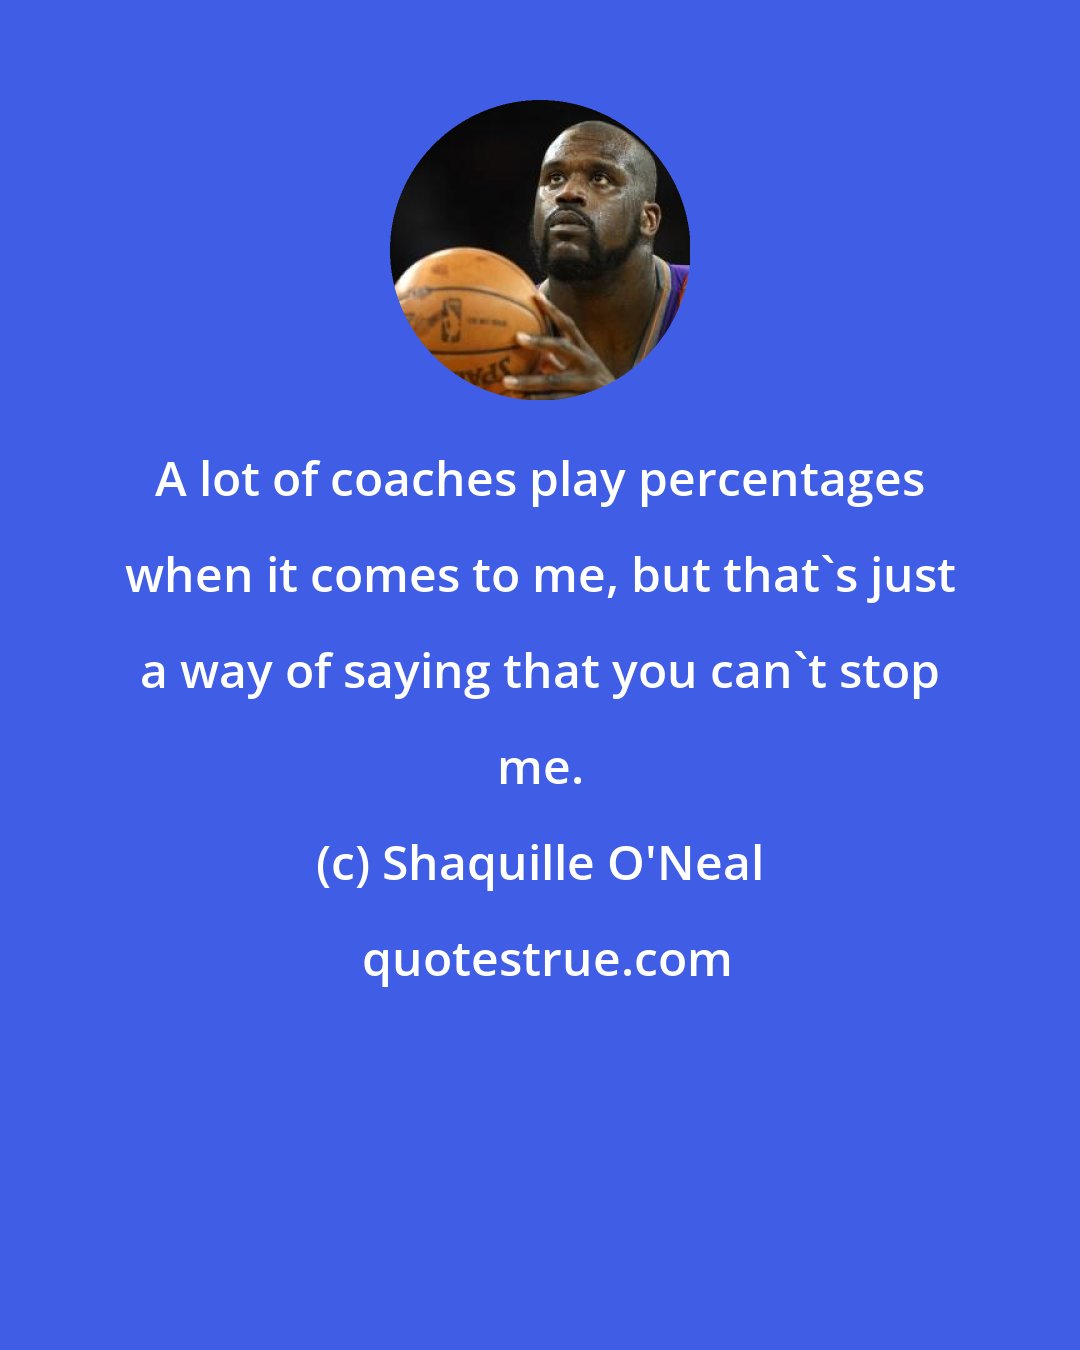 Shaquille O'Neal: A lot of coaches play percentages when it comes to me, but that's just a way of saying that you can't stop me.